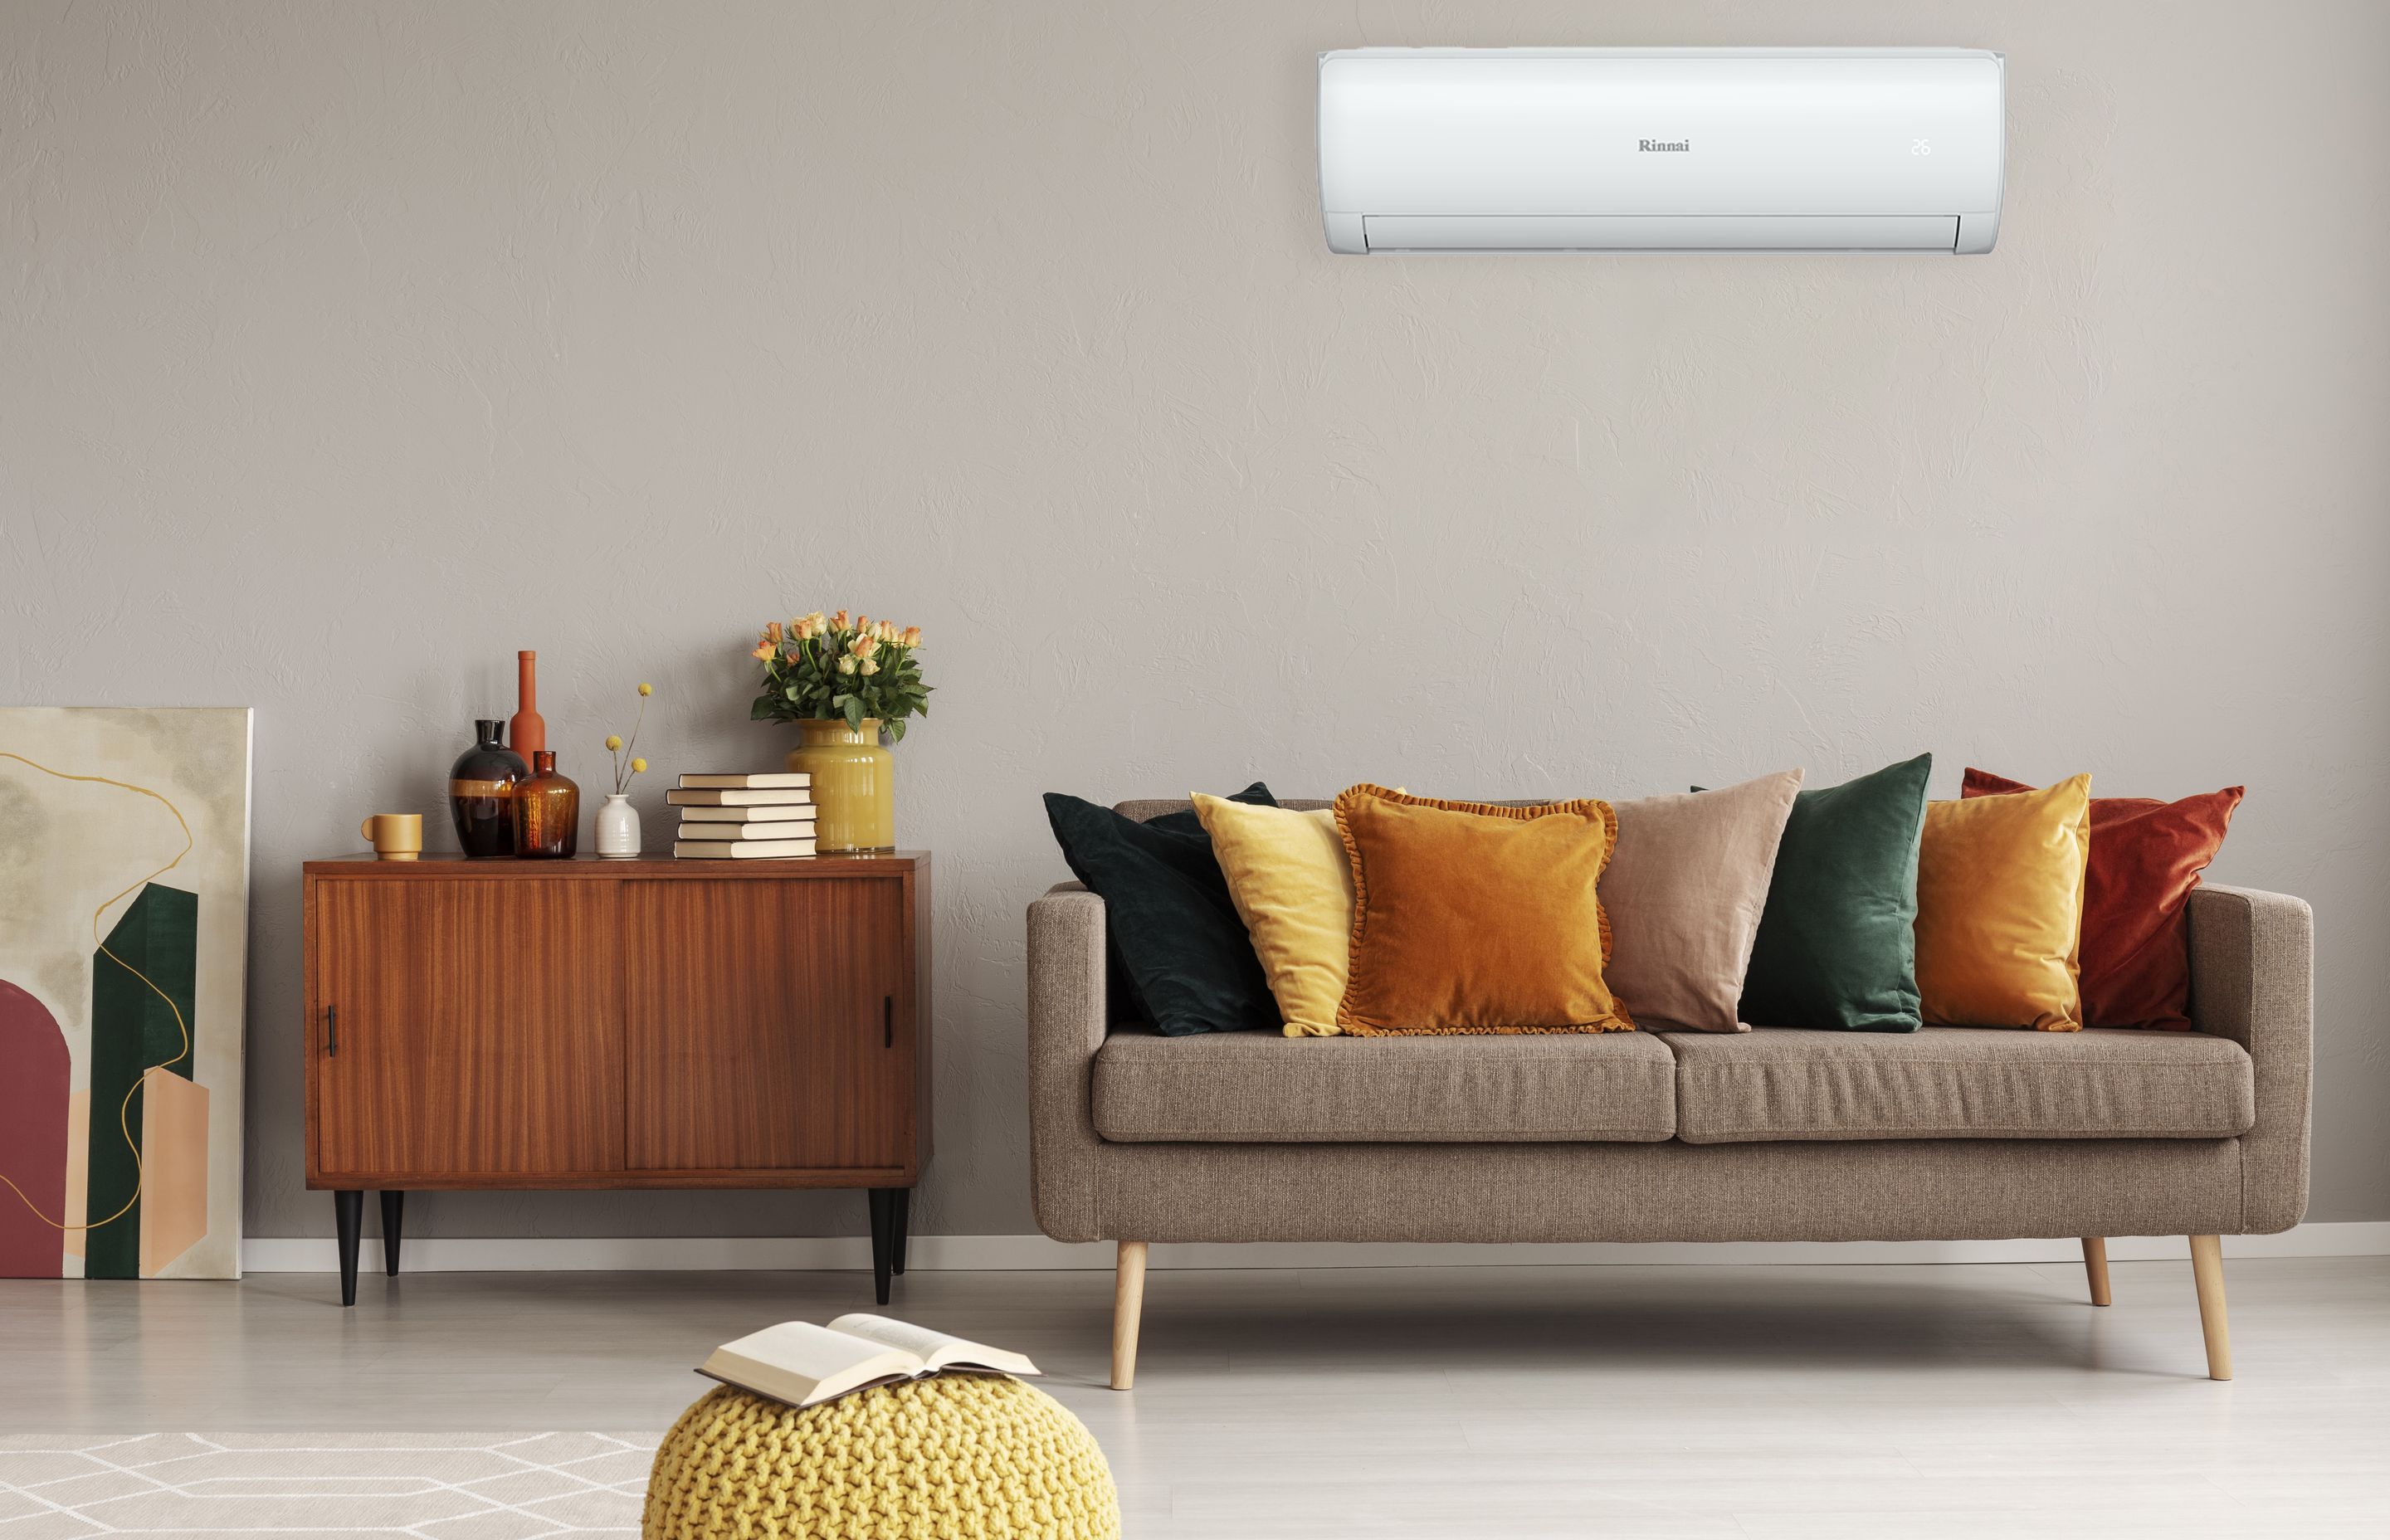 ‘High-Wall Split’ heat pumps are the most popular and cost-effective system and are designed to be a one-room heating and cooling solution and have a single outdoor unit connected to one indoor unit.